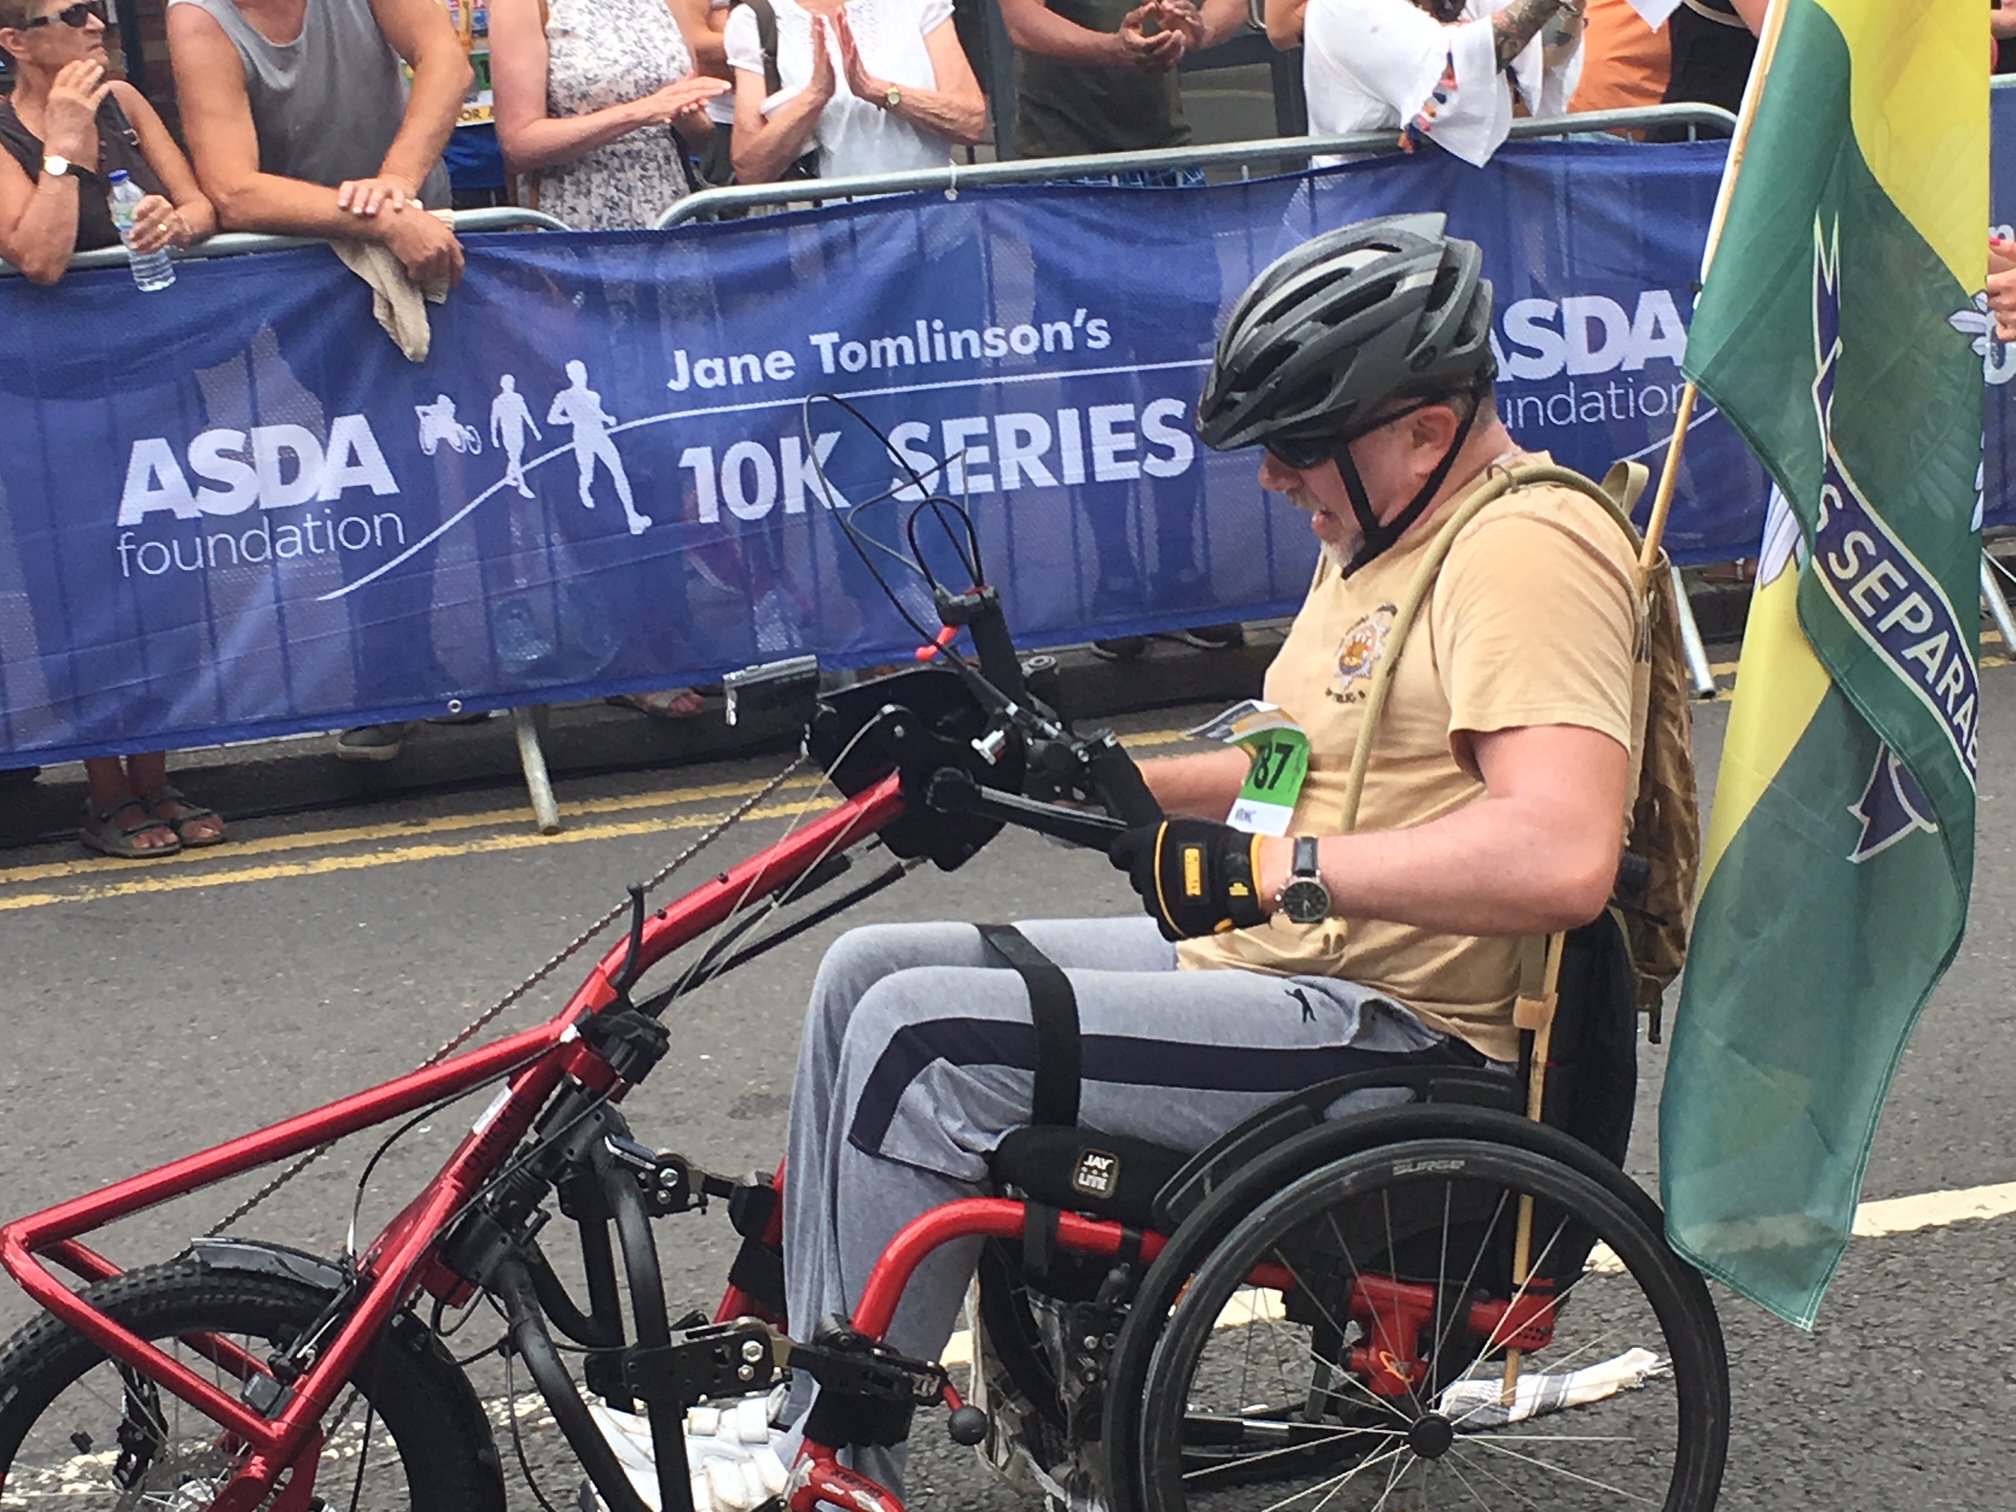 Man using a hand powered cycle. Man is wearing a grey cycling helmet, light coloured T-shirt and grea trousers. He looks determined. There is what appears to be a forces flag attached to the rear of his cycle. Signs behind him state "Asda Foundation Jane Tomlinson's 10K series.